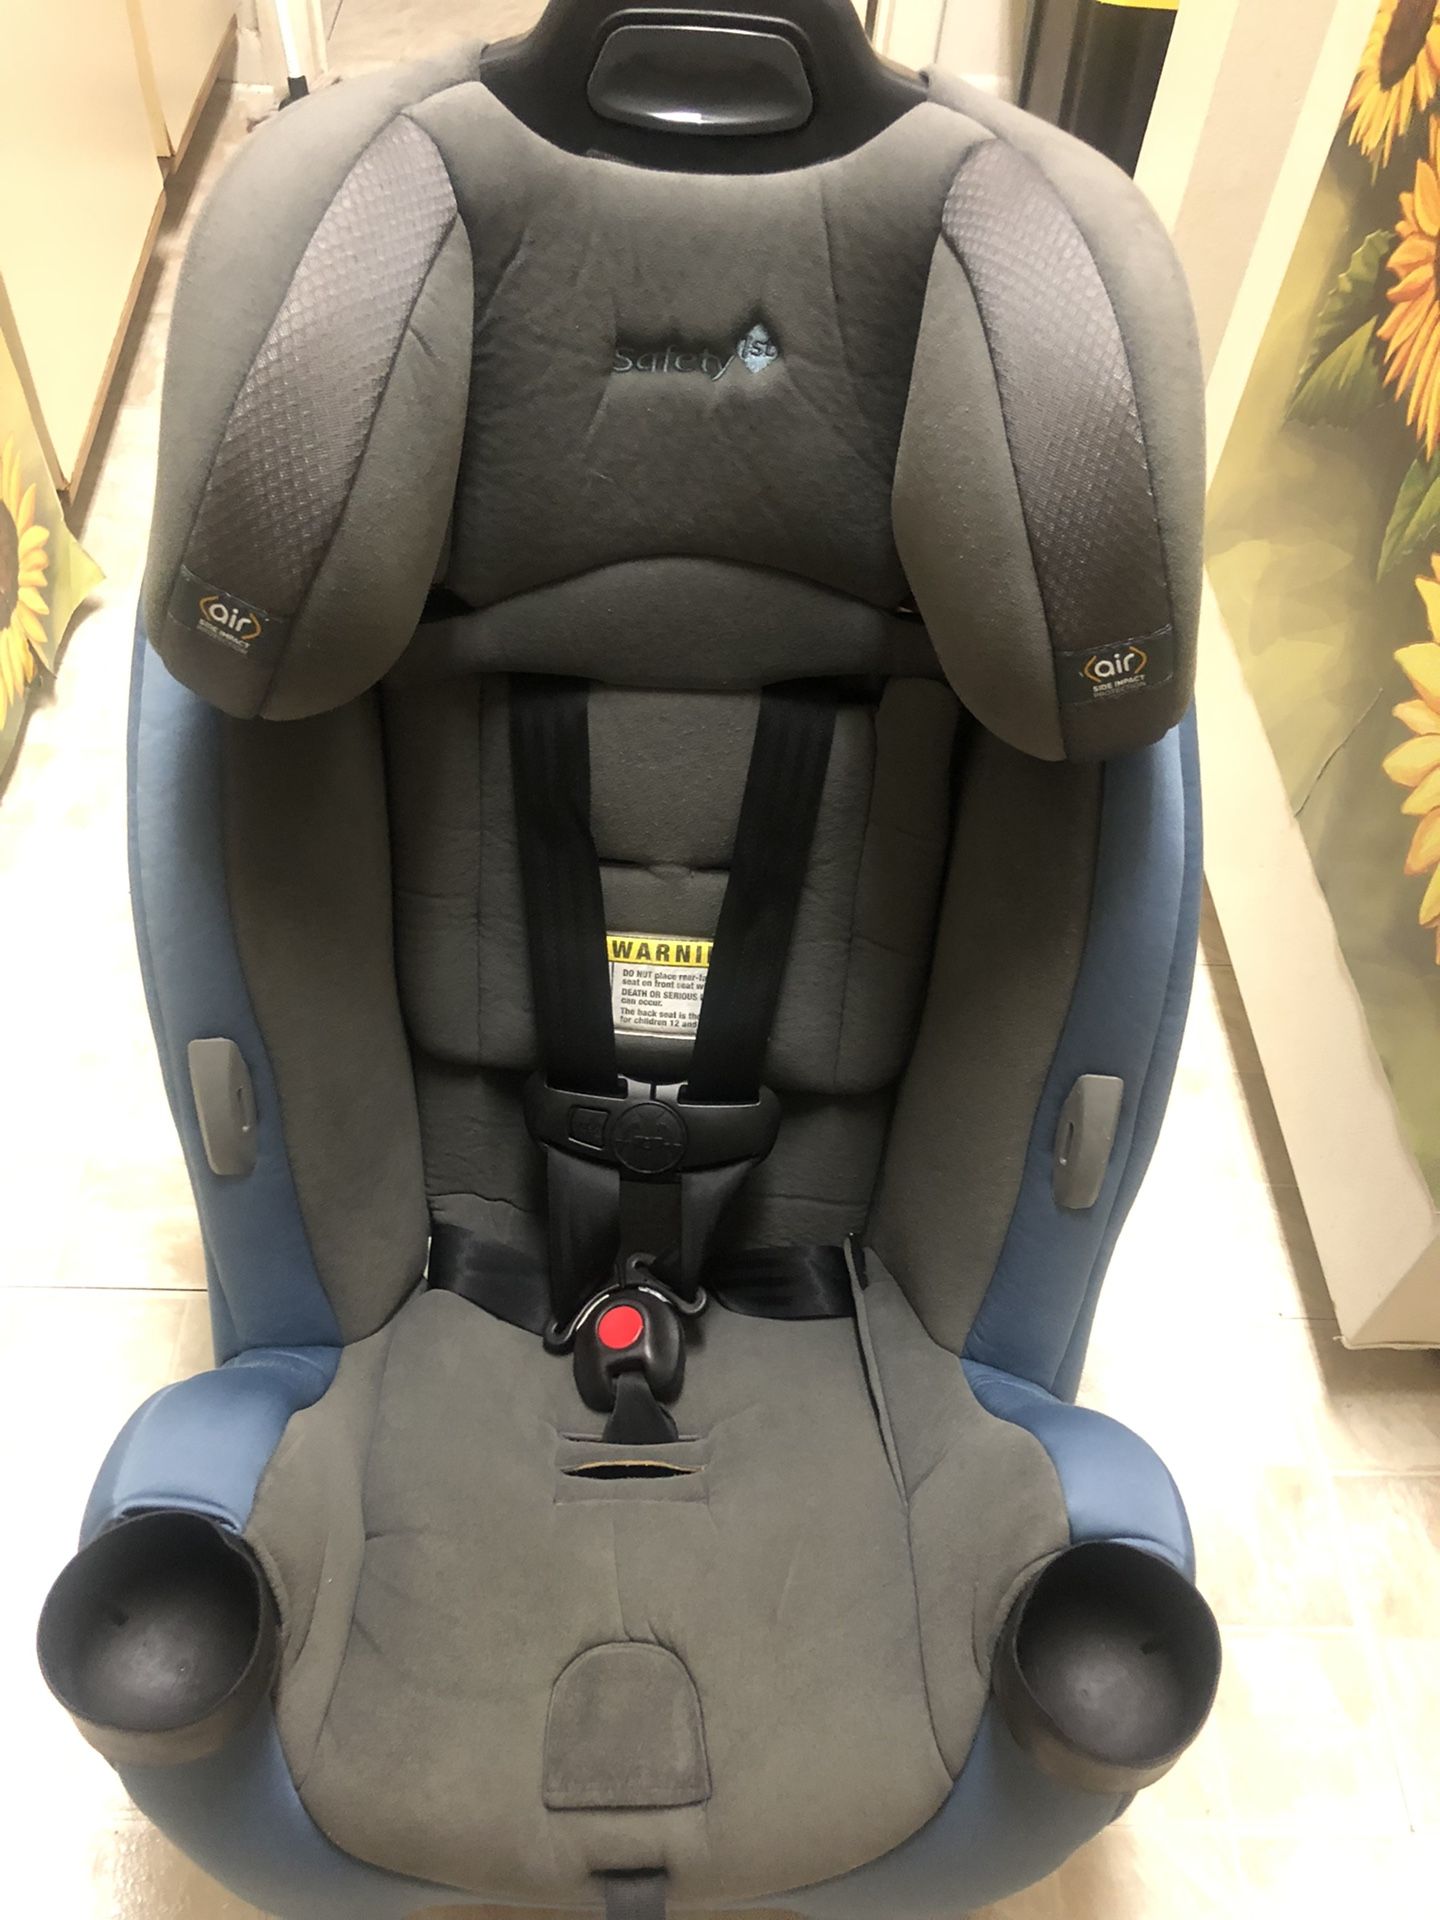 Super Safe  Safety First Car seat /booster Seat Don’t miss Out Asking $60